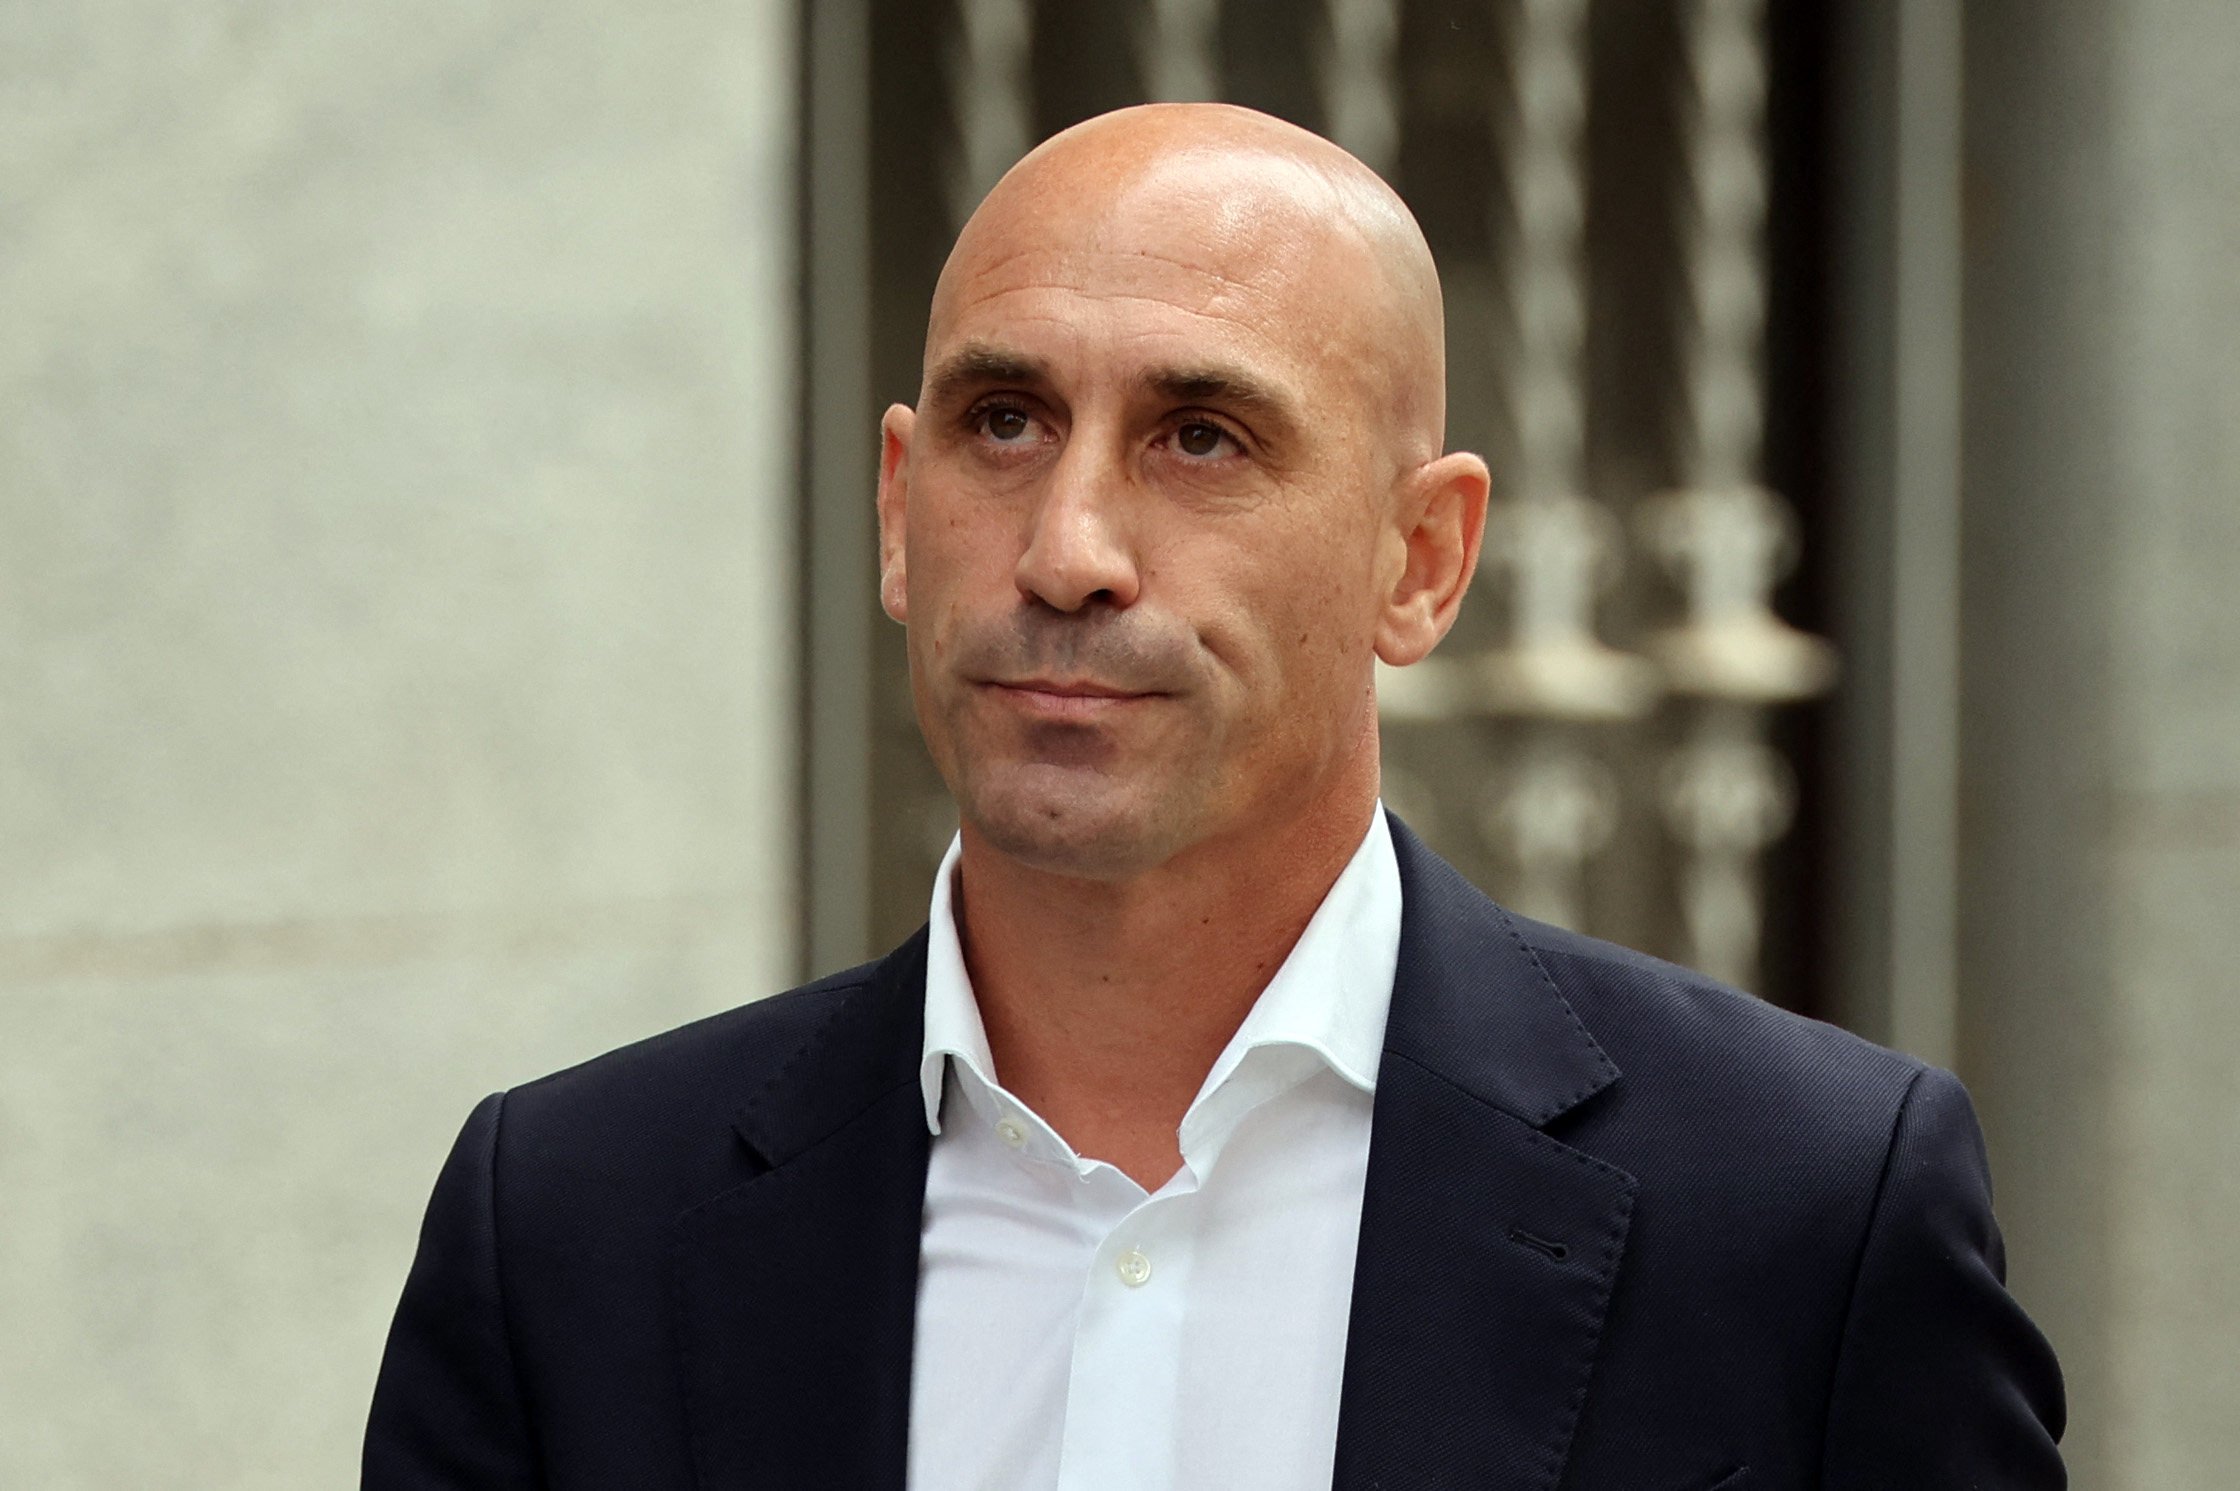 Former president of the Spanish football federation Luis Rubiales leaves the Audiencia Nacional court in Madrid. Photo: AFP